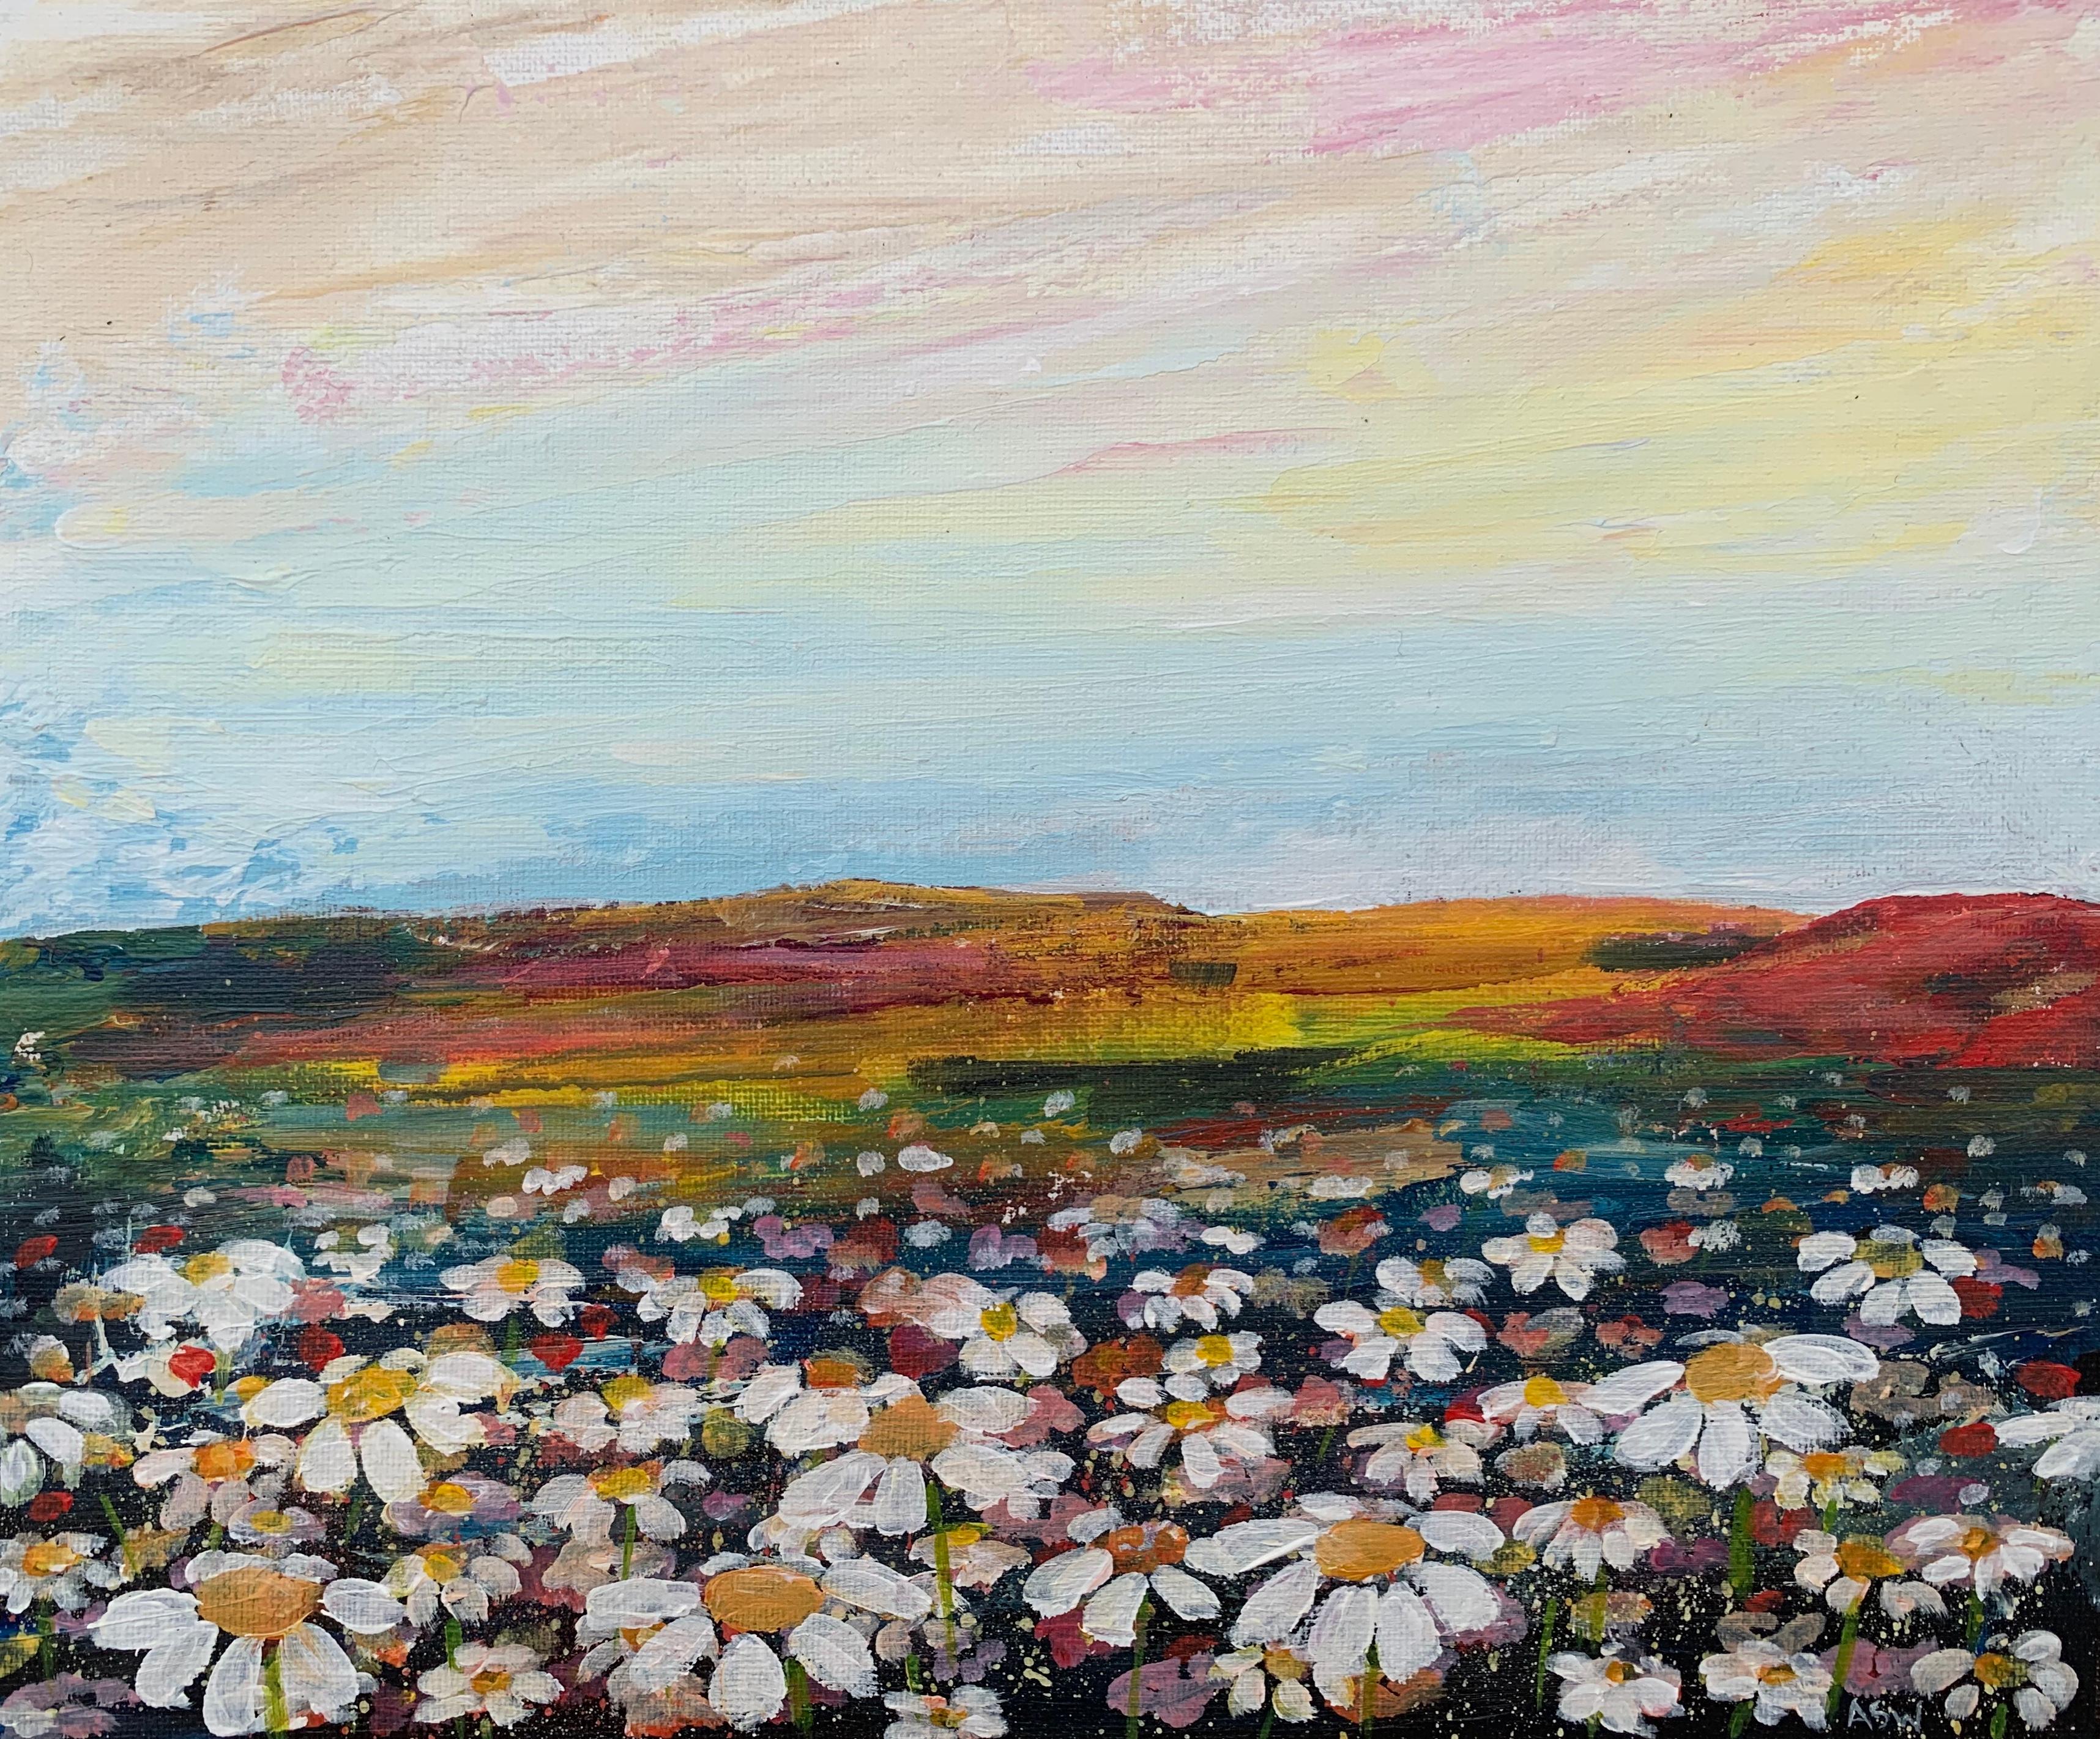 Wild Daisy Flowers English Countryside Landscape Painting by Contemporary Artist For Sale 6